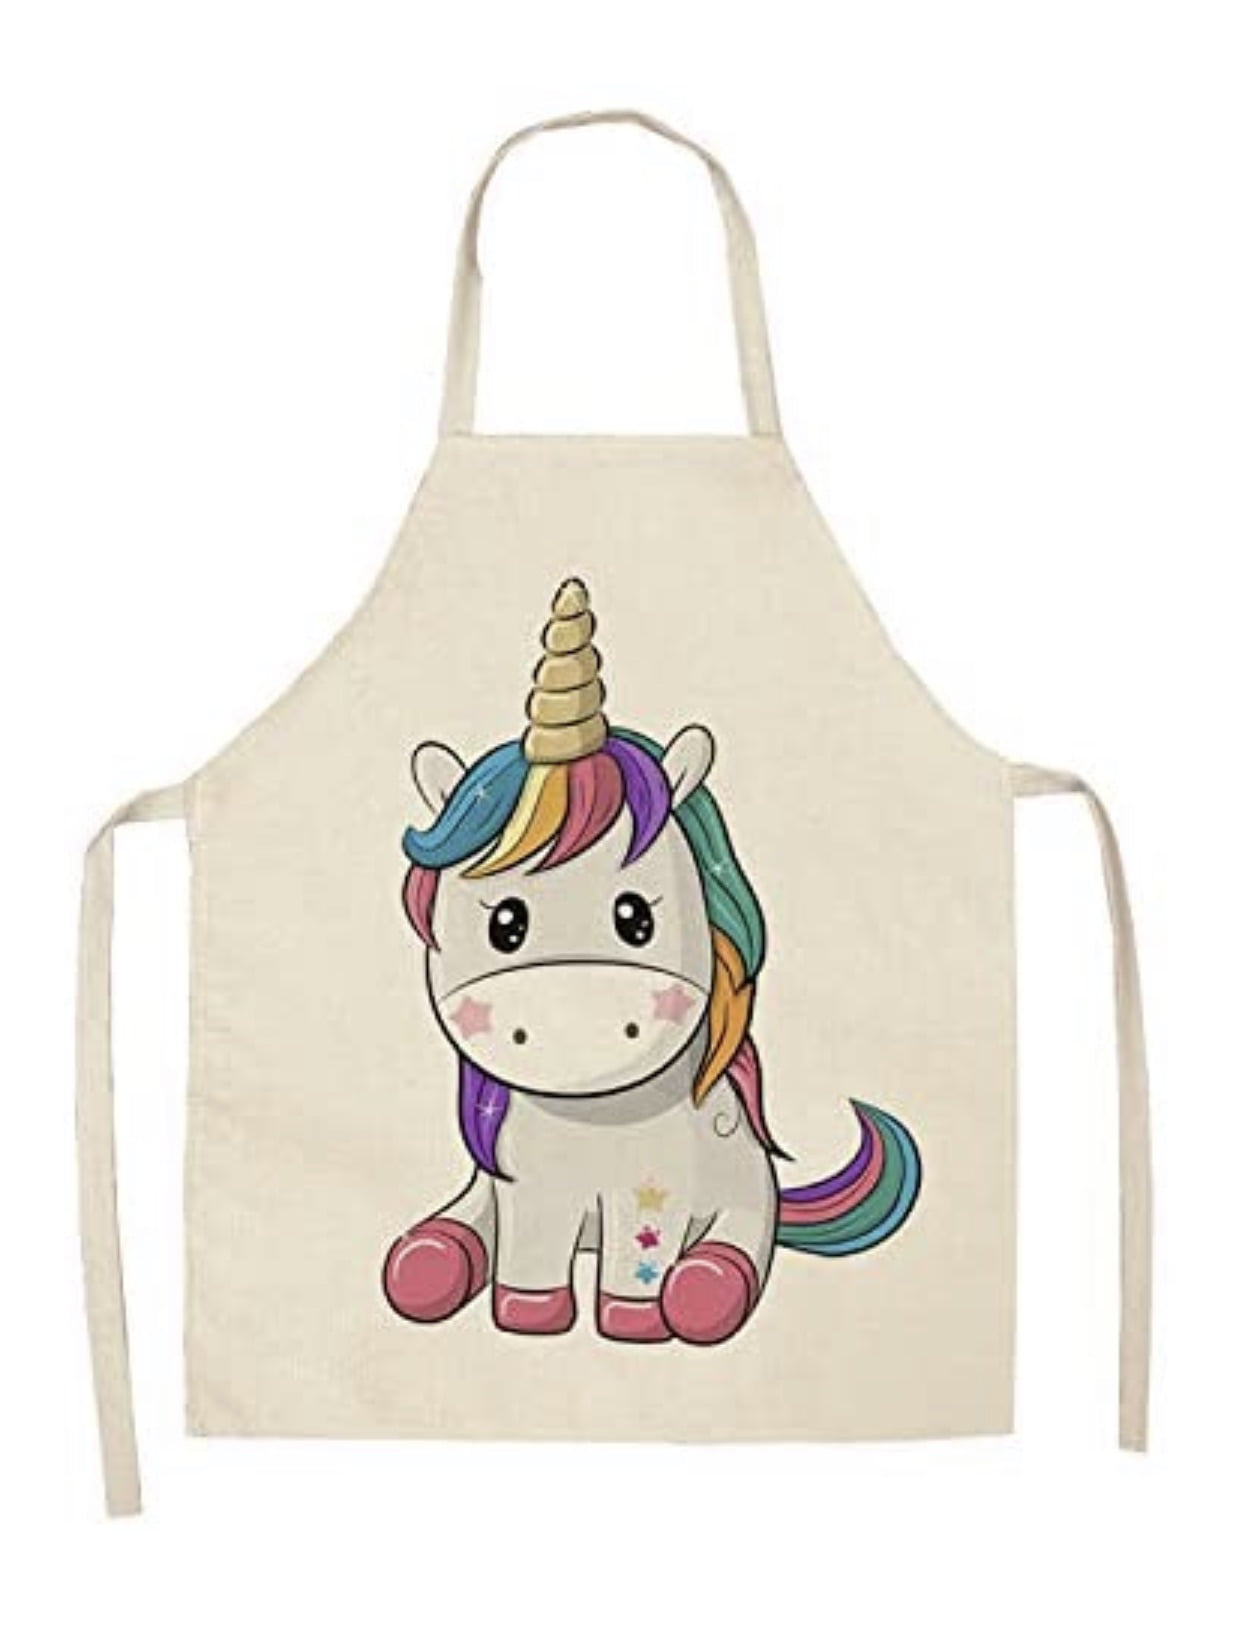 Kids Apron and Chef Hat Set Unicorn M Kids Chef Costume for Boys Girls Baking Gardening Painting Role Play Age 3-12